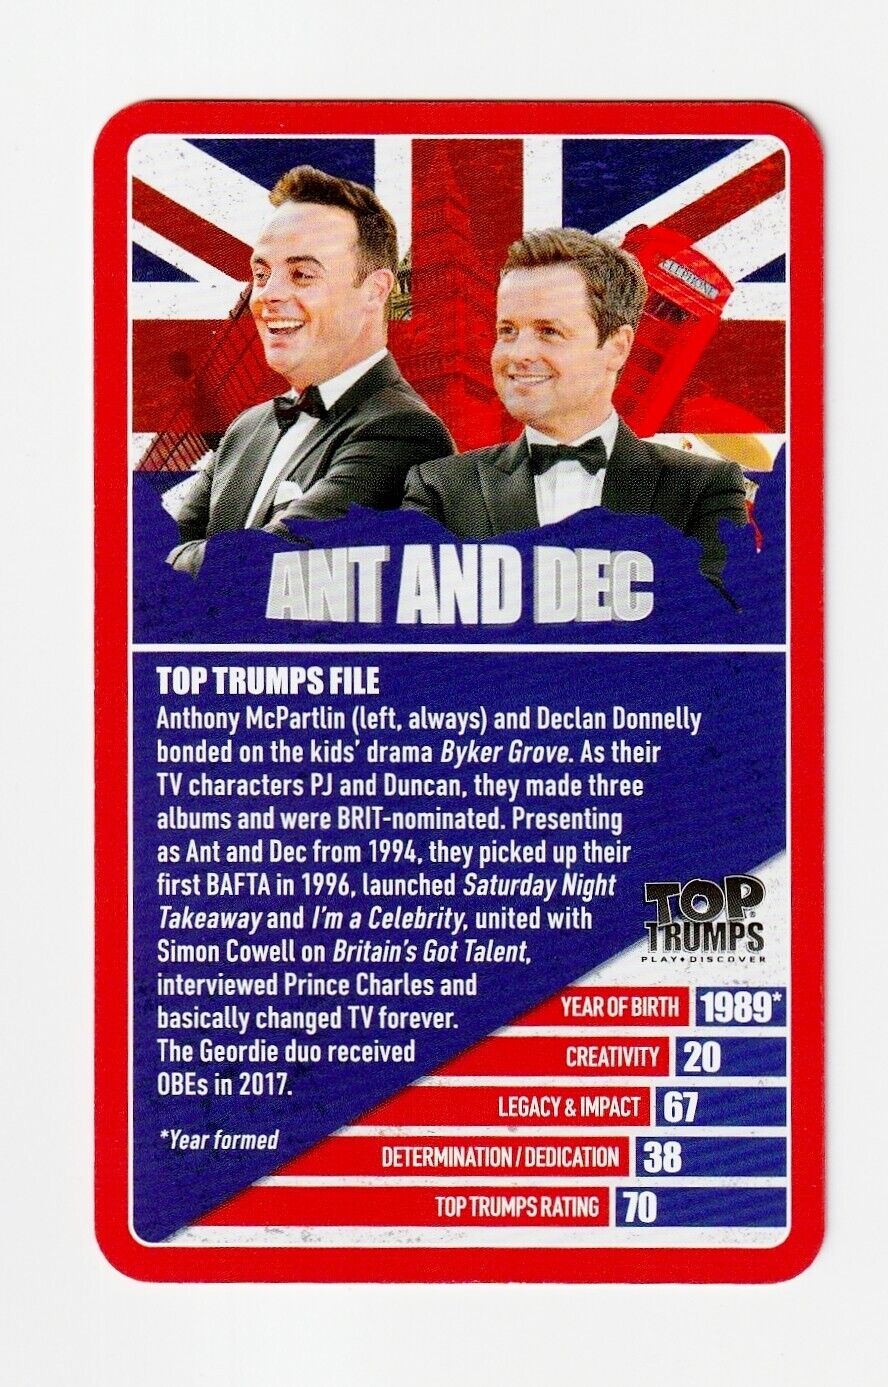 ANT AND DEC 2020 Top Trumps National Treasures Card McPartlin Declan Donnelly*